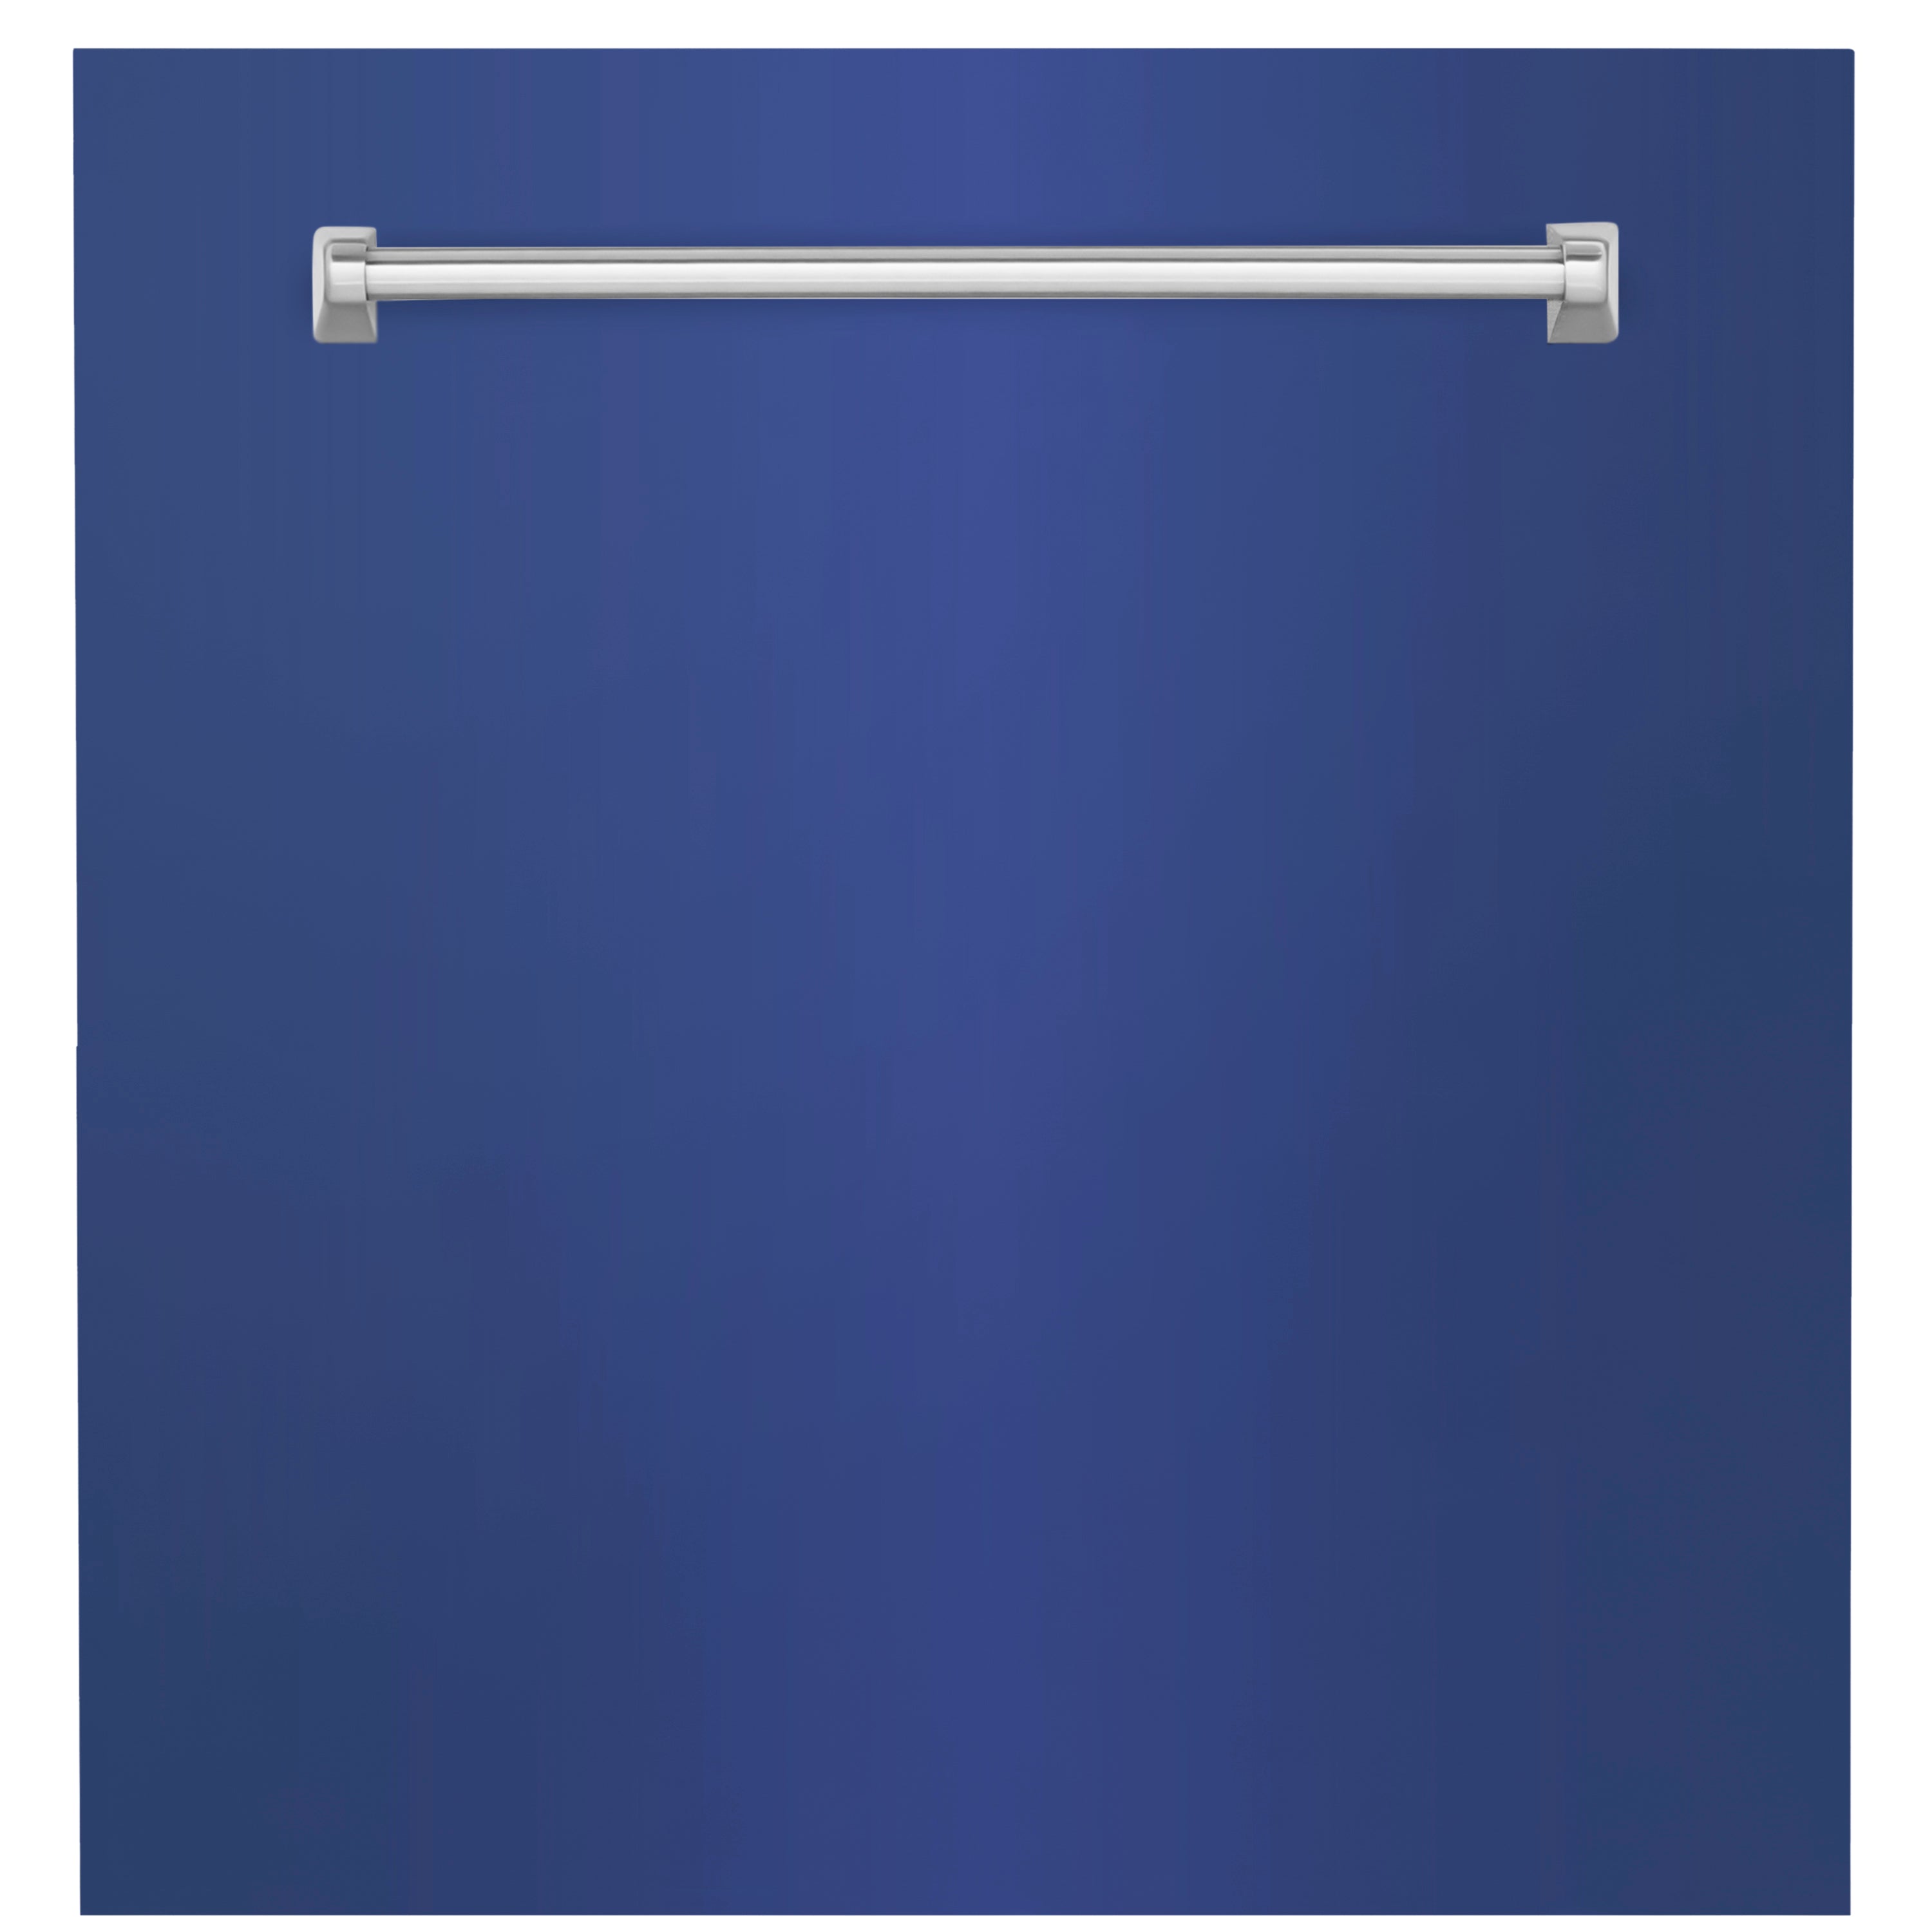 ZLINE 24" Monument Dishwasher Panel with Traditional Handle in Blue Matte without Kickplate